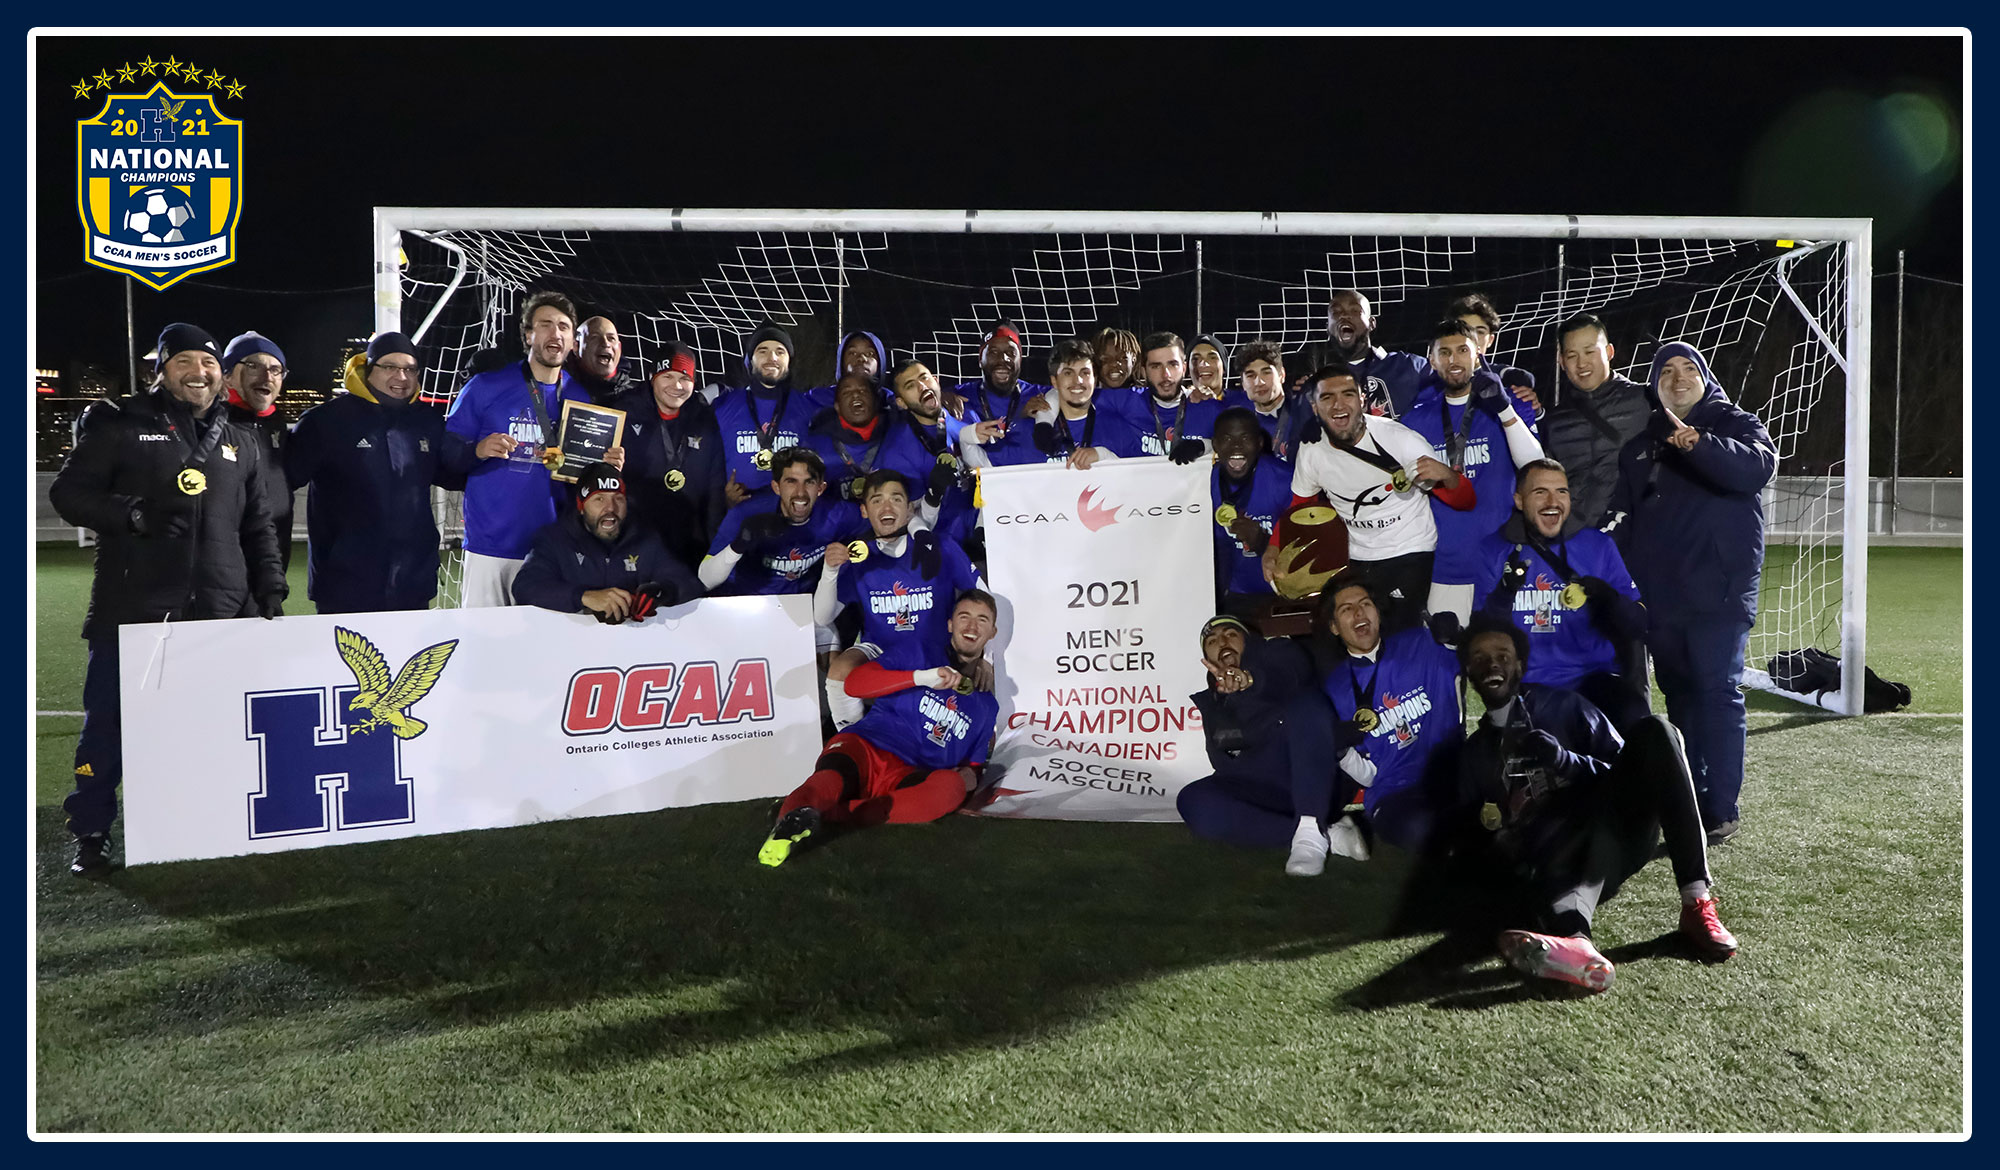 Men's soccer team photo after winning the national championship